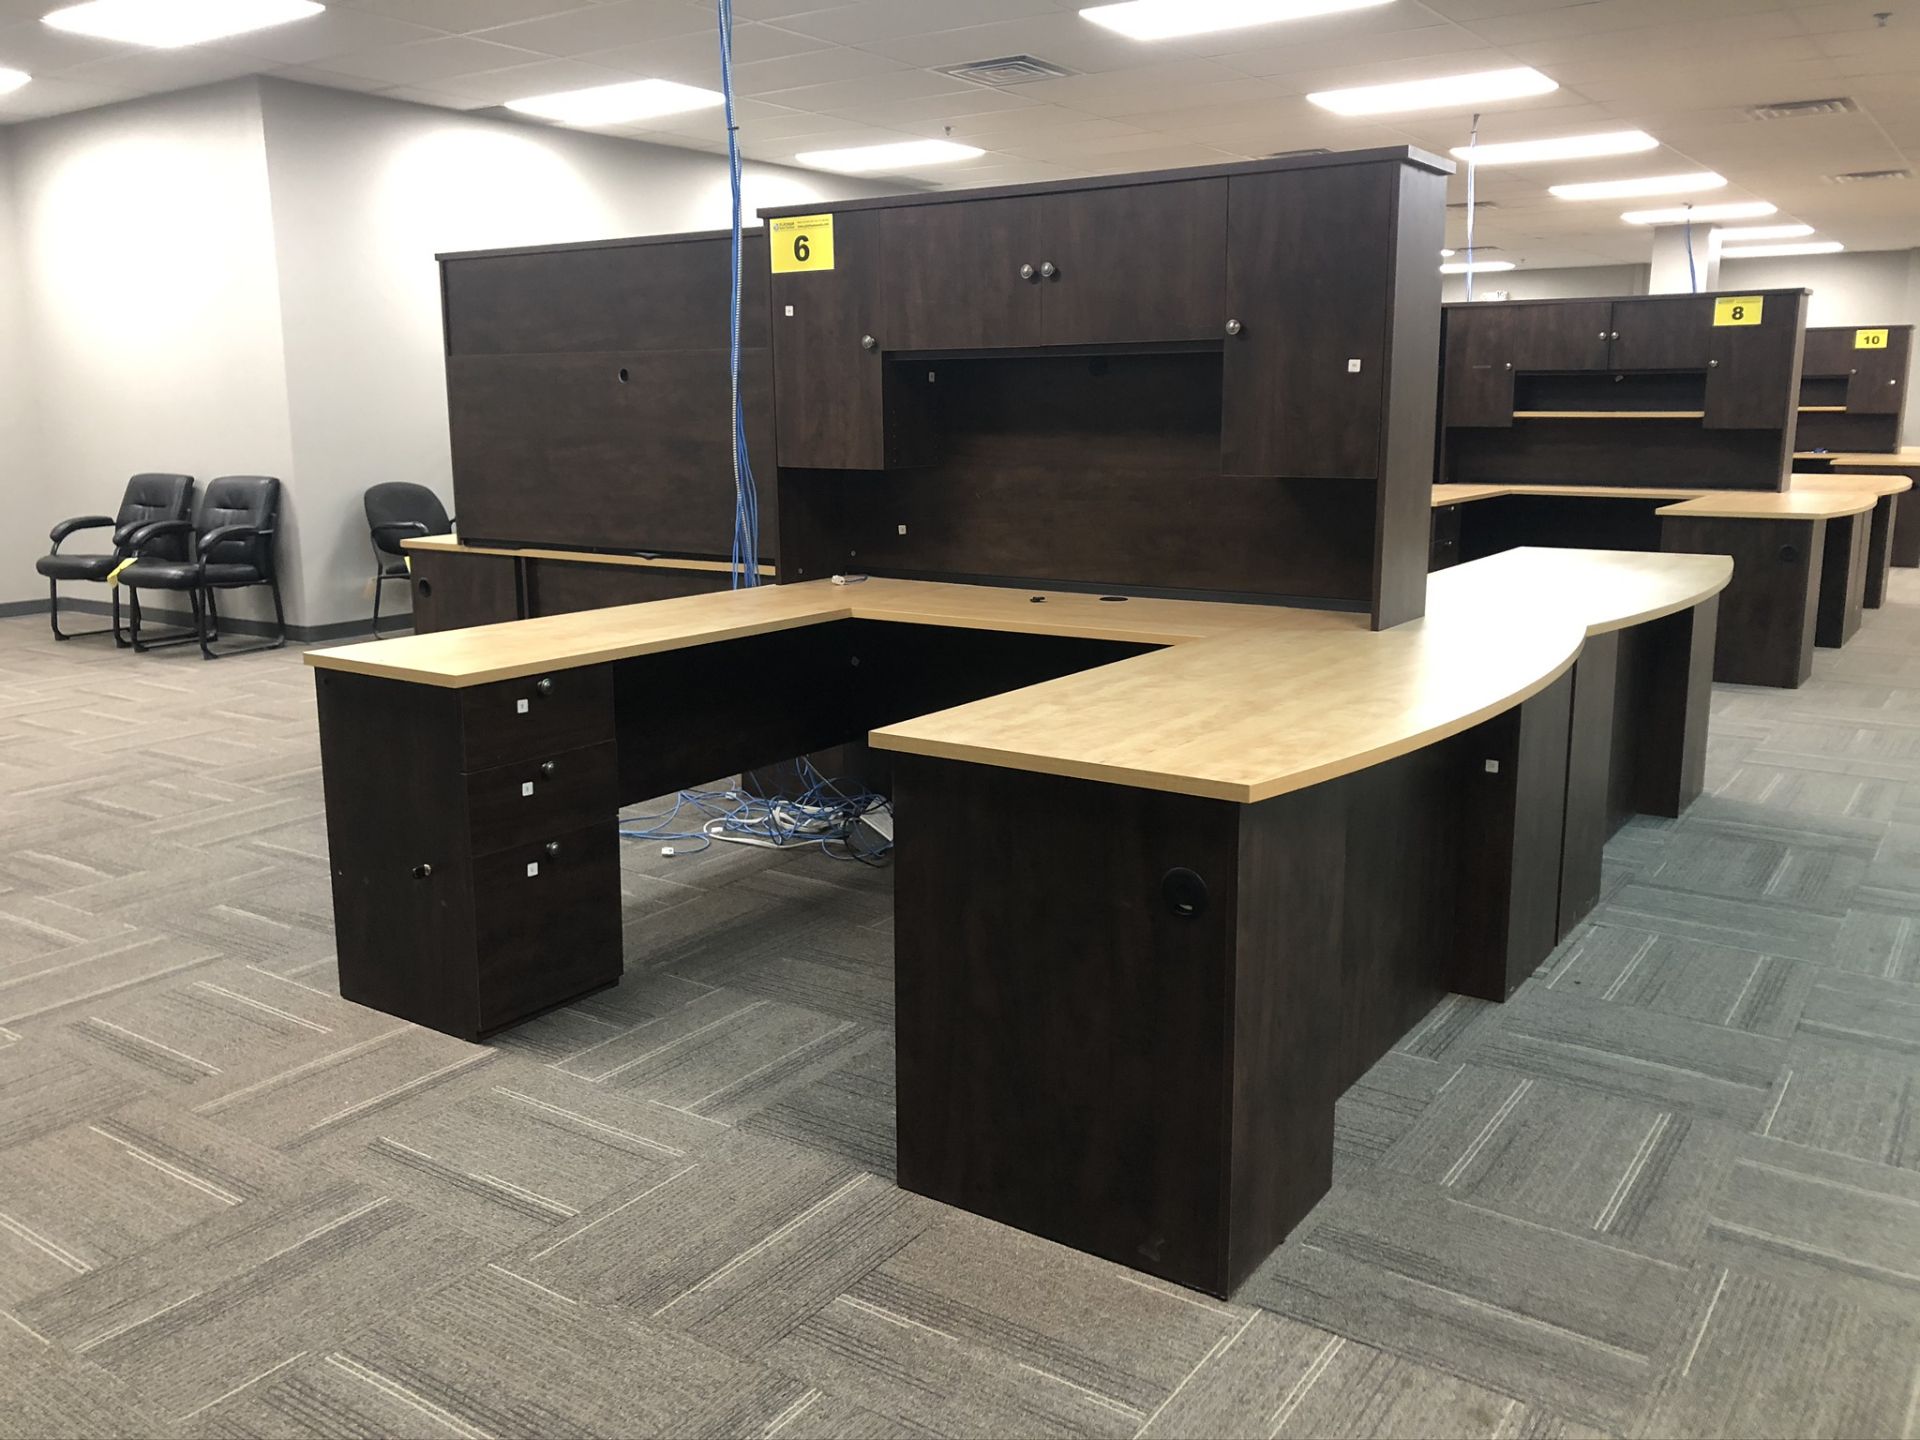 BROWN, U-SHAPED, OFFICE DESK WITH HUTCH, 7' X 6'